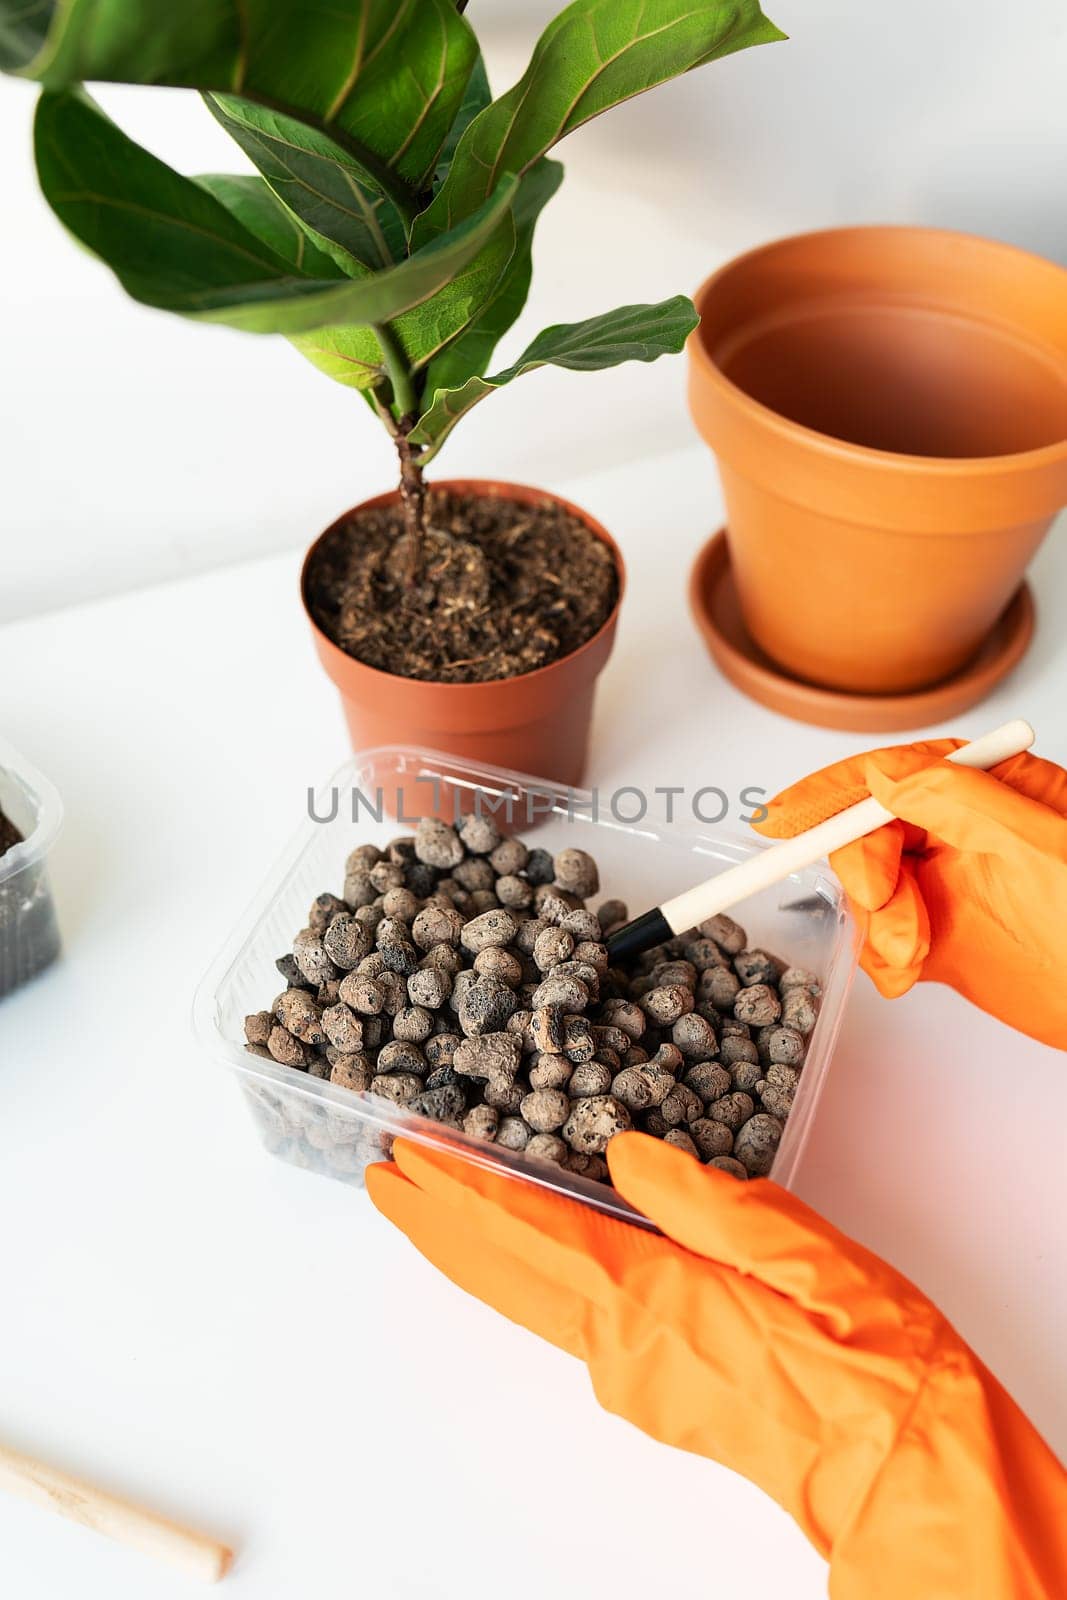 The process of transplanting a flowerpot-ficus lyrata. Hands holding a ficus transplant. Potted home plant ficus lyrata. Home gardening. Plants that are air purifiers